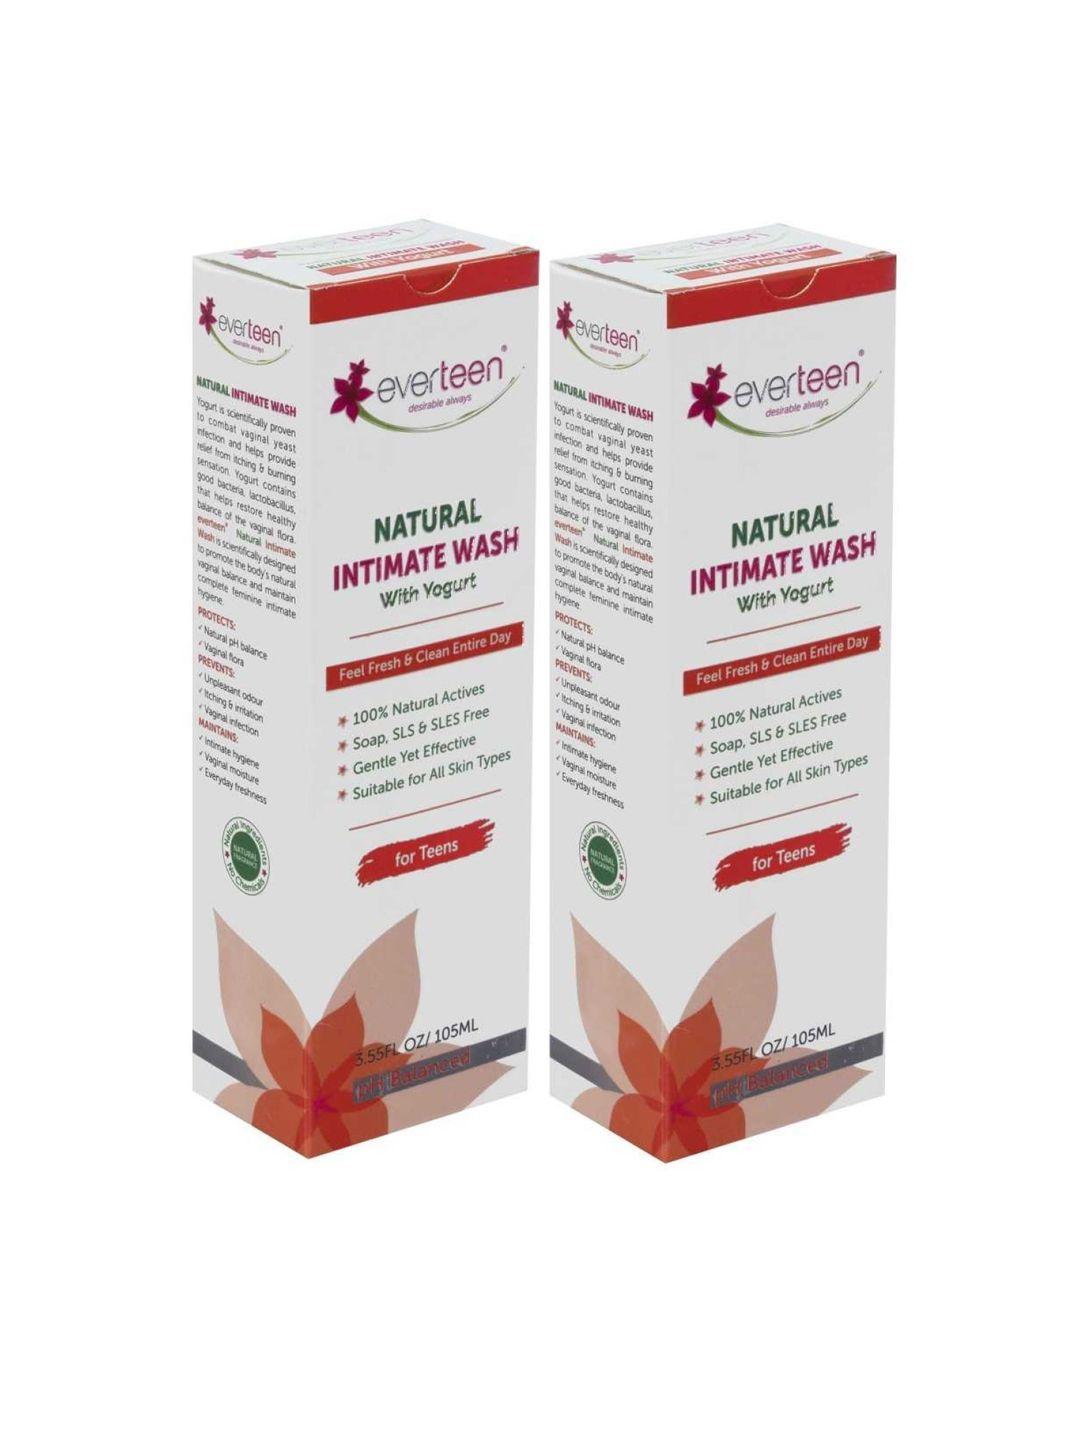 everteen woman pack of 2 natural intimate wash with yogurt-105ml each